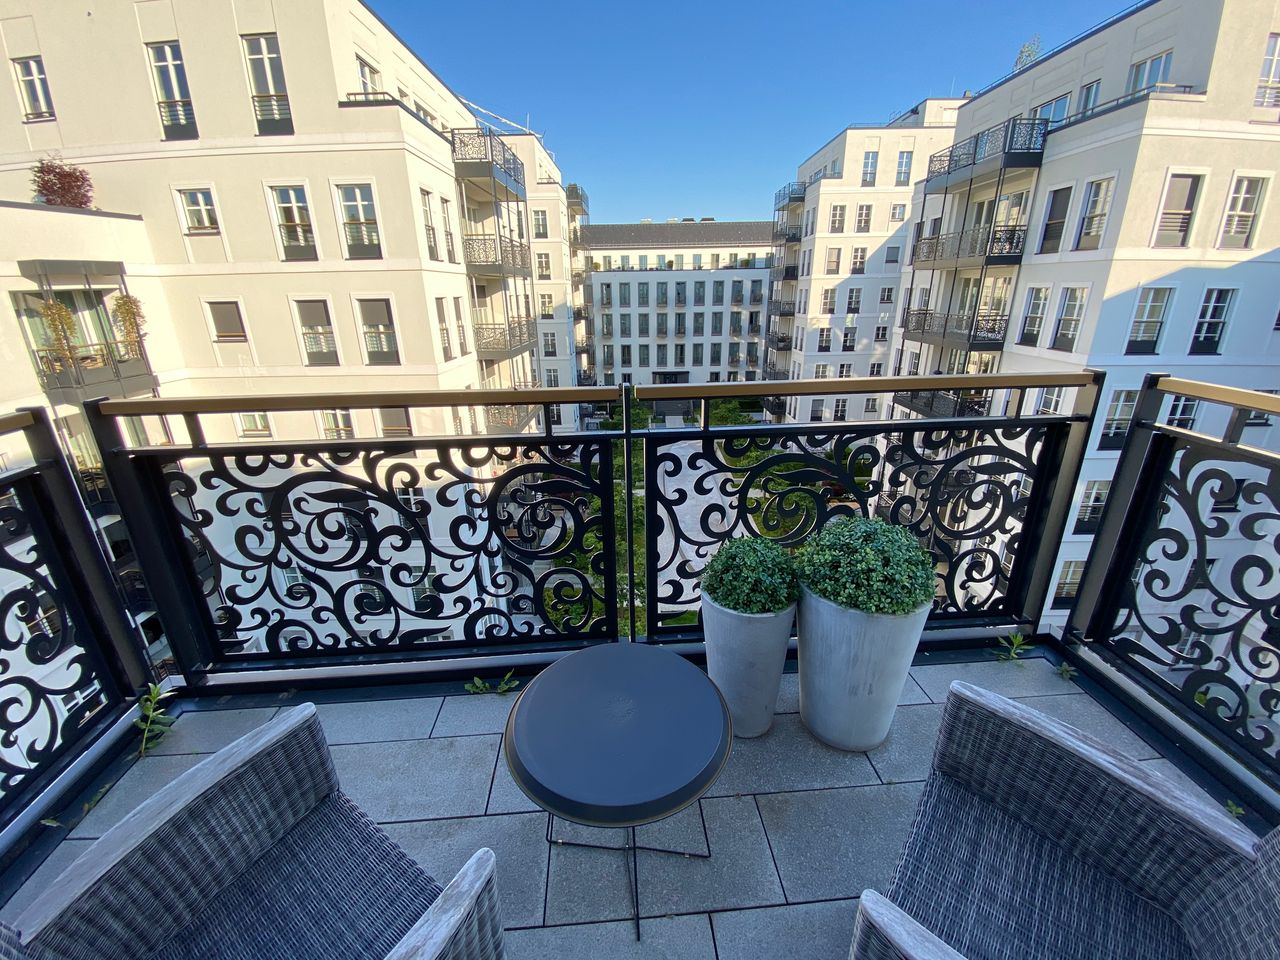 Lovingly furnished and charming penthouse in the heart of Düsseldorf